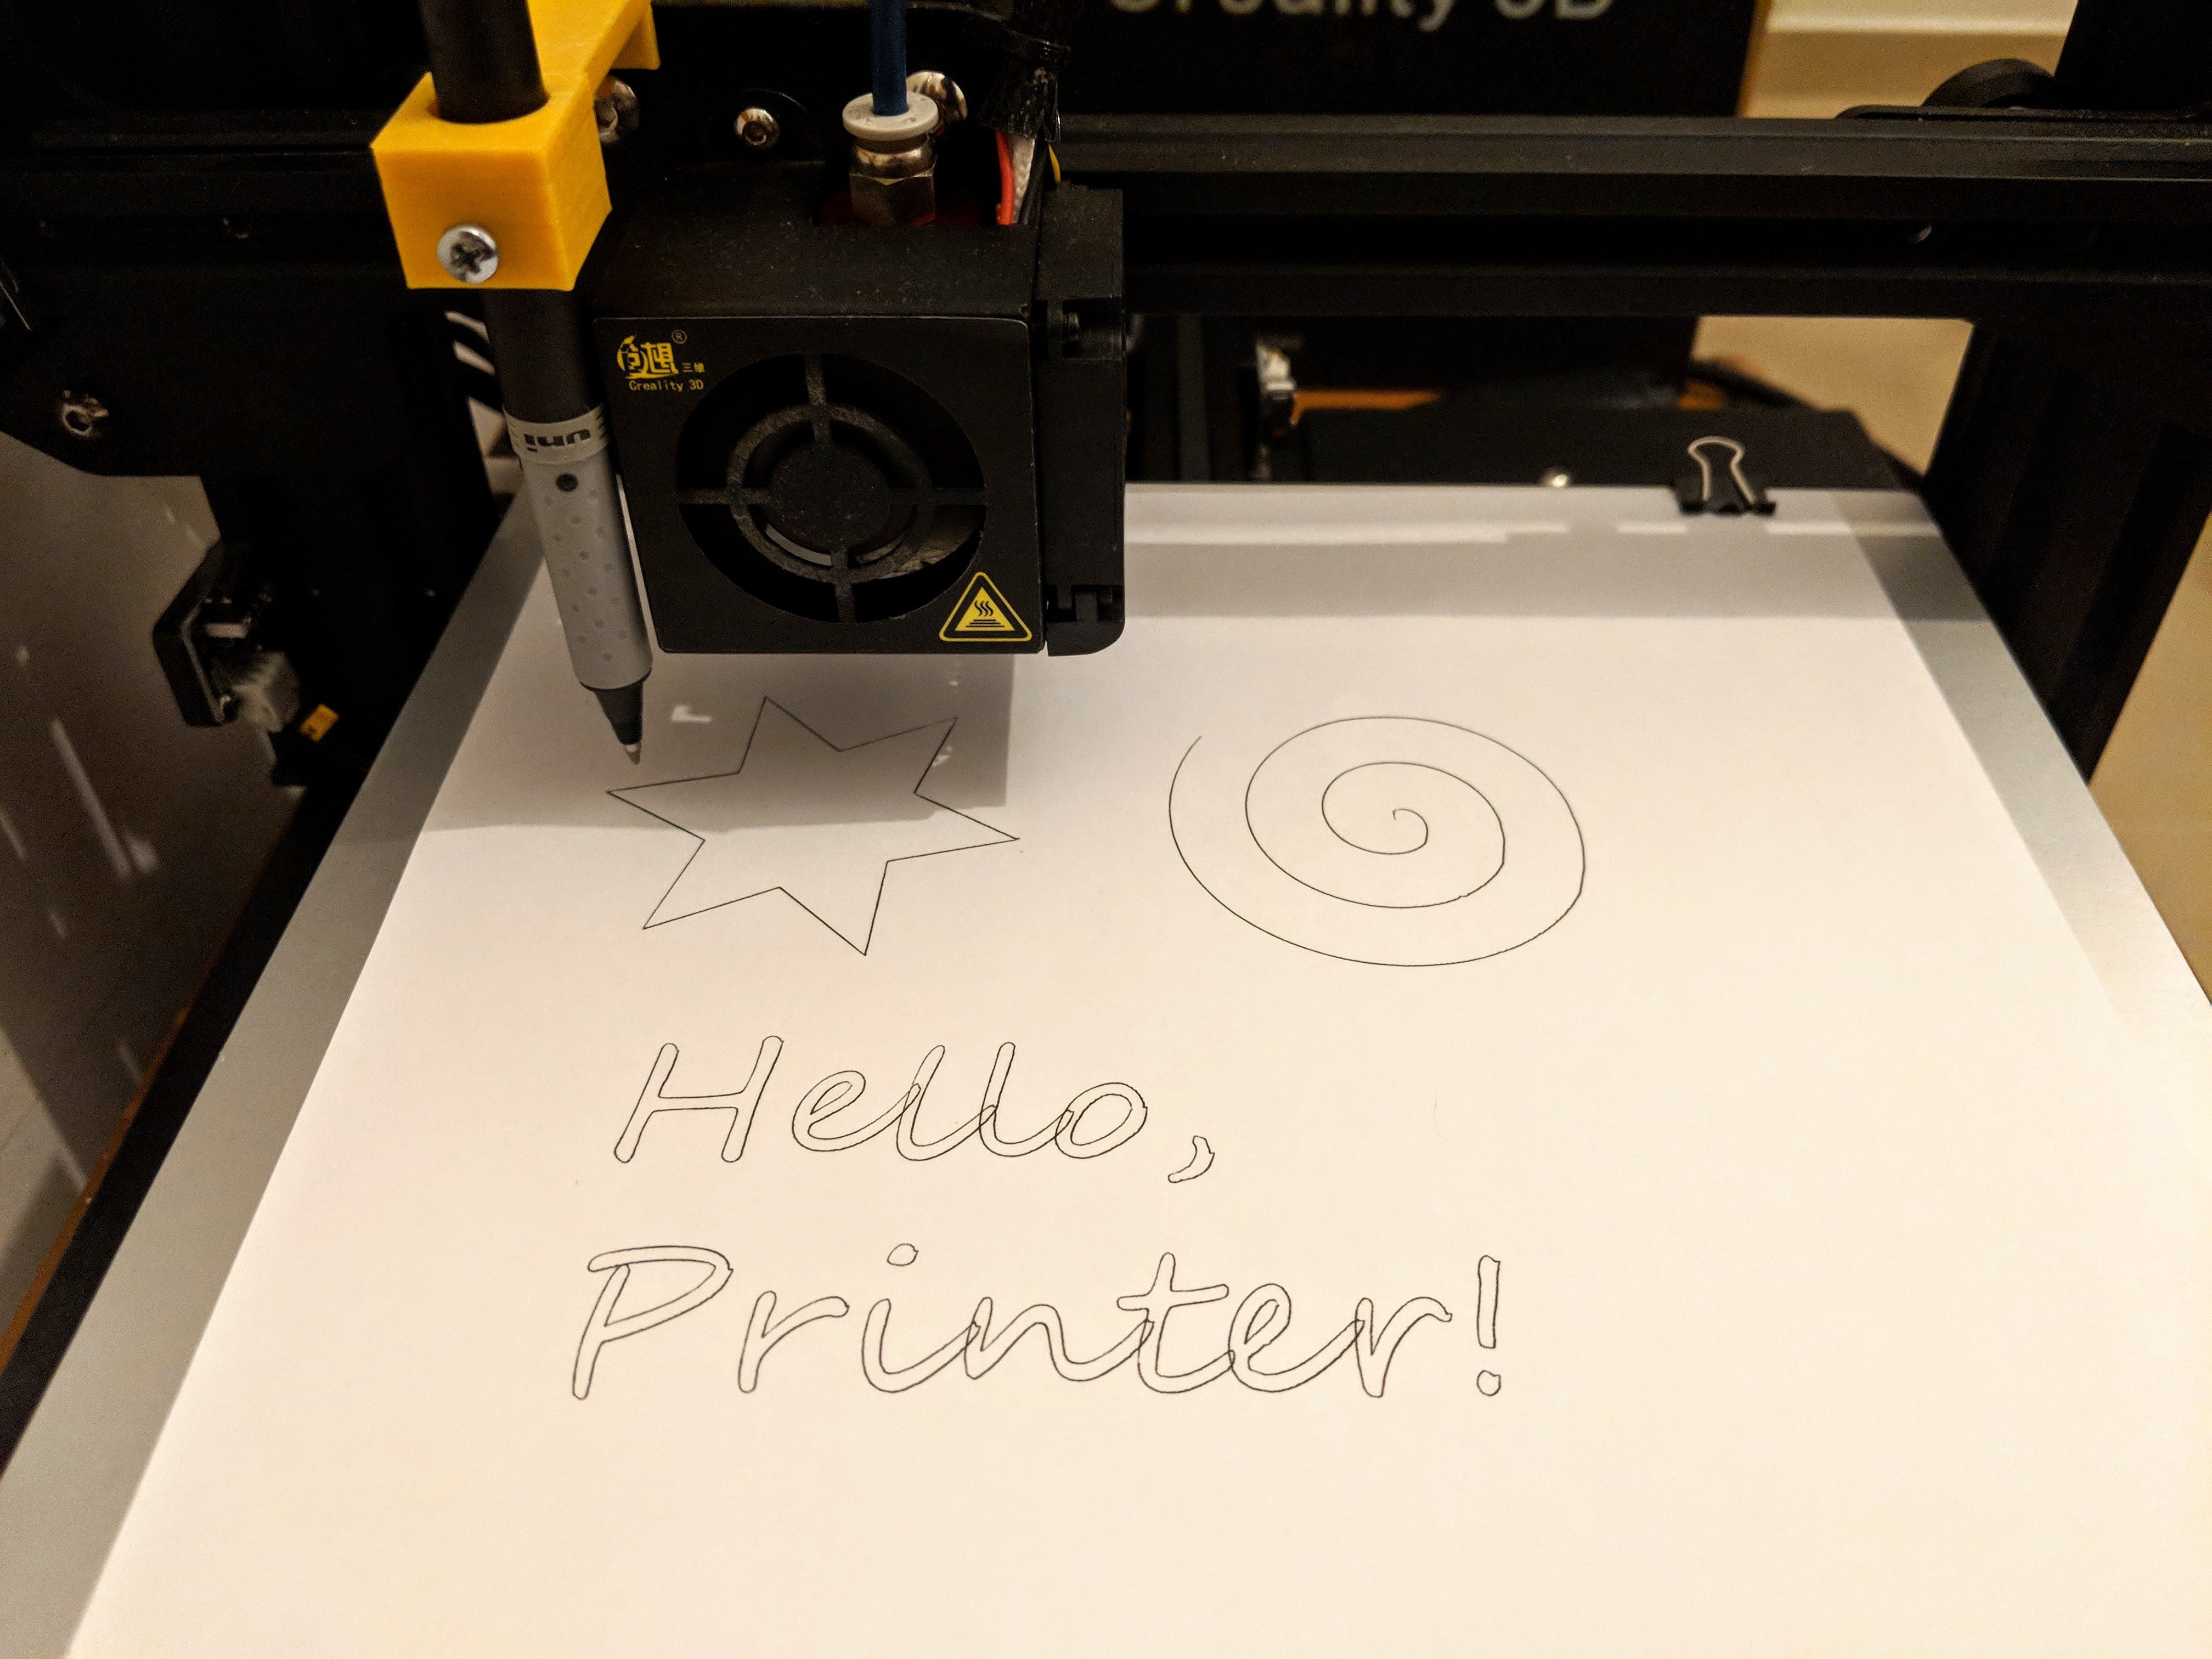 Download How To Turn Your 3d Printer Into A Plotter In One Hour By Uri Shaked Medium